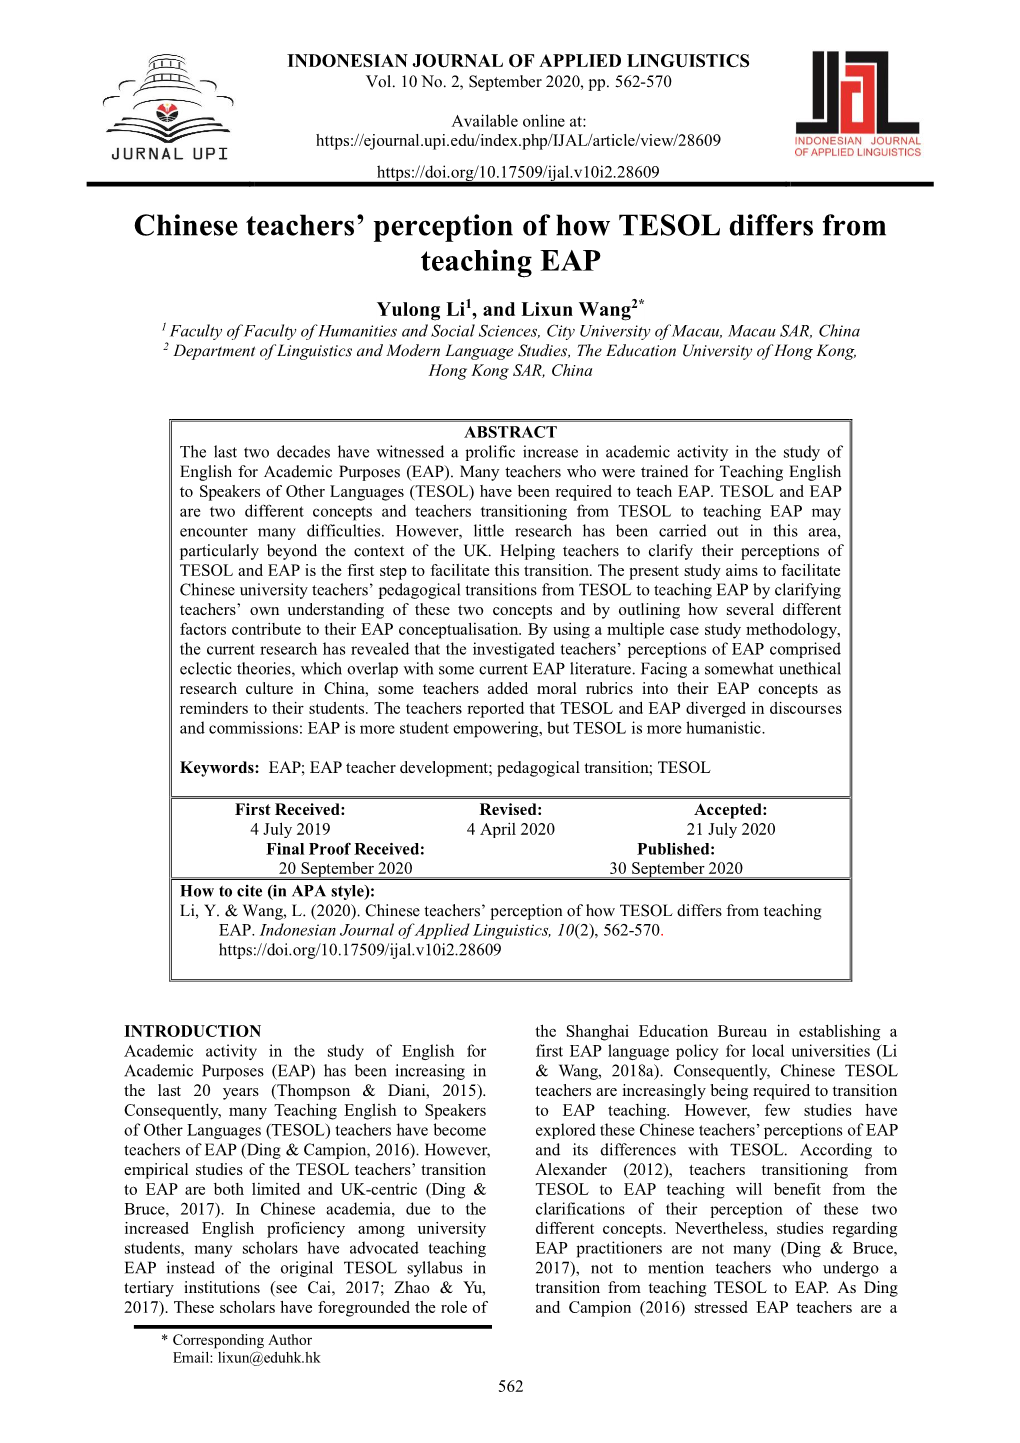 Chinese Teachers' Perception of How TESOL Differs from Teaching